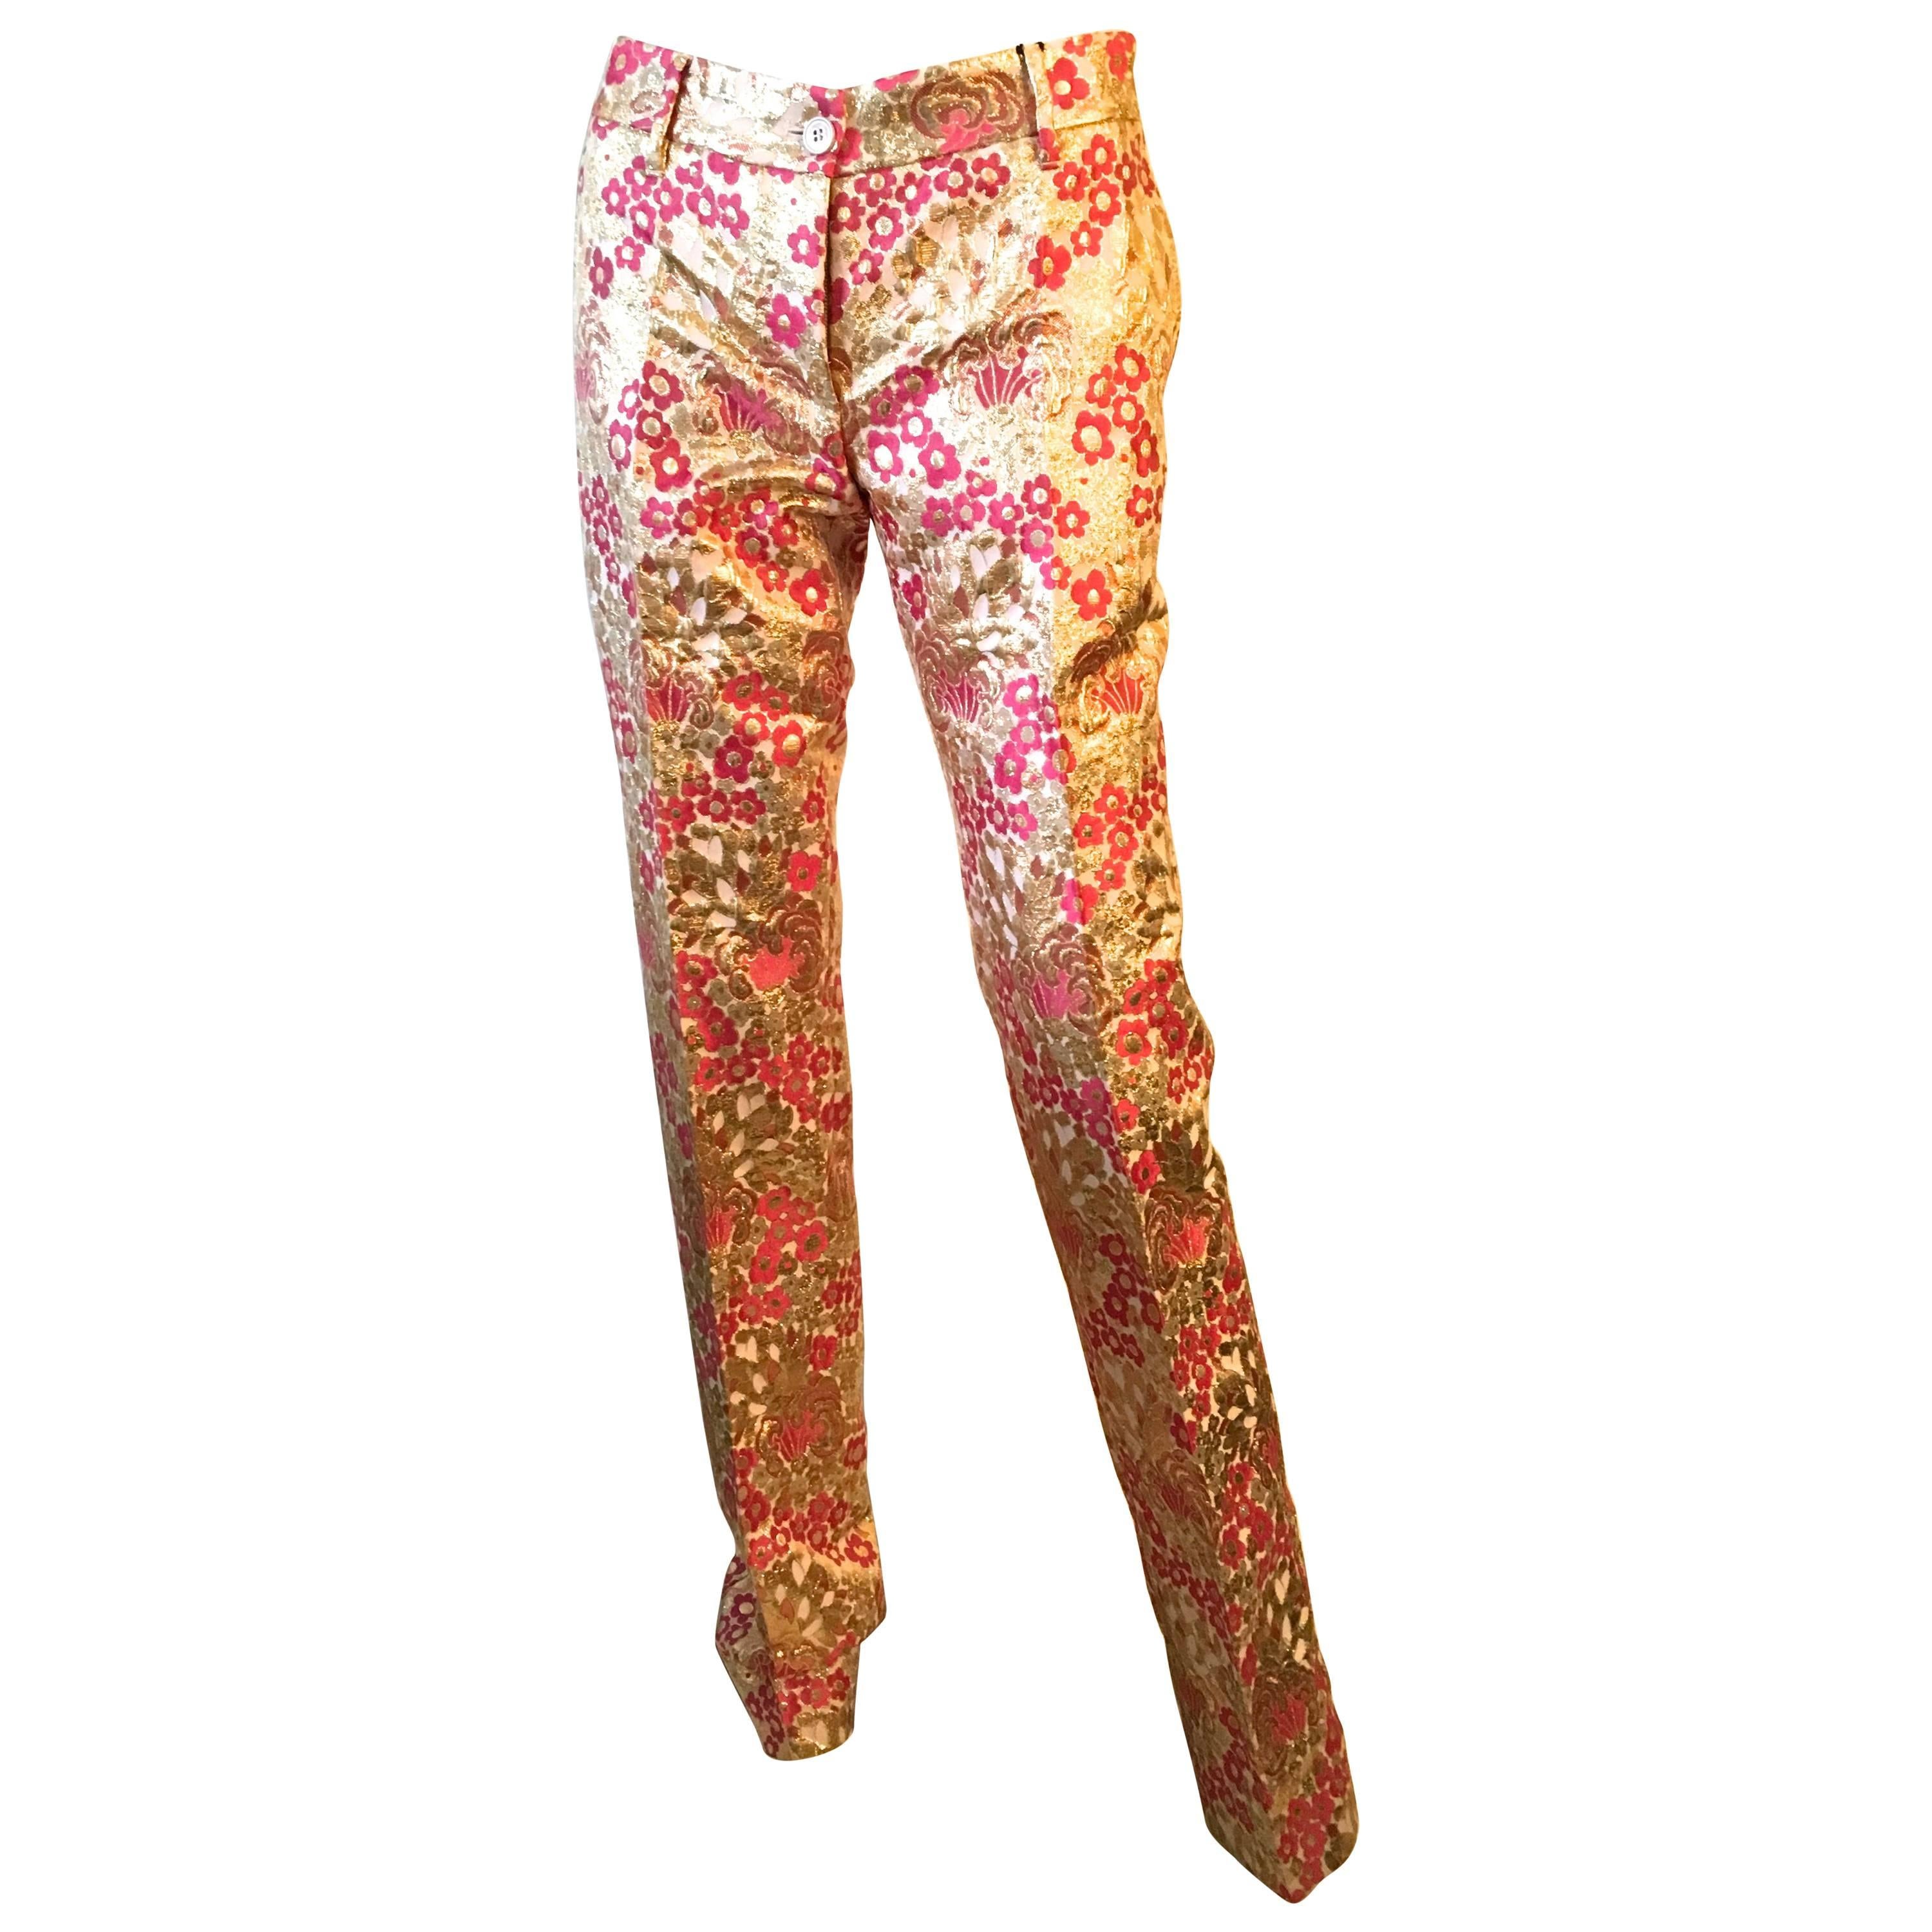 Dolce and Gabbana Pants - New with Tags - Size 38 For Sale